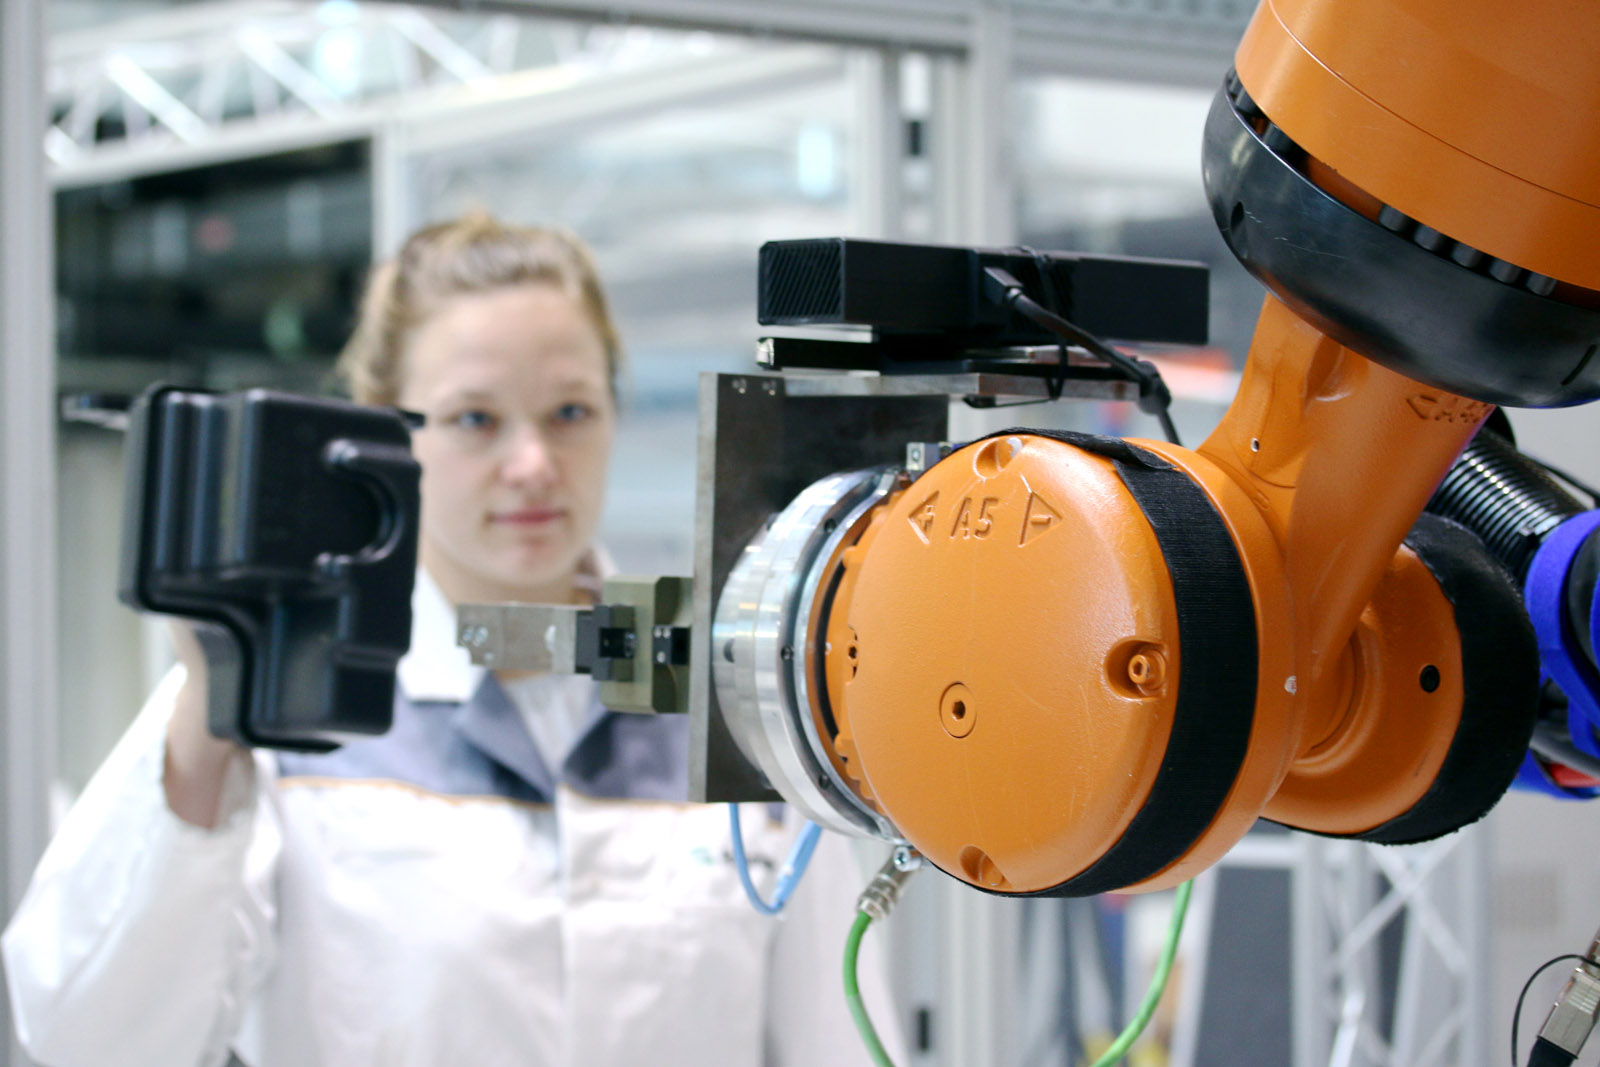 The robot detects the component in the worker’s grasp and cautiously follows it until she hands it over.